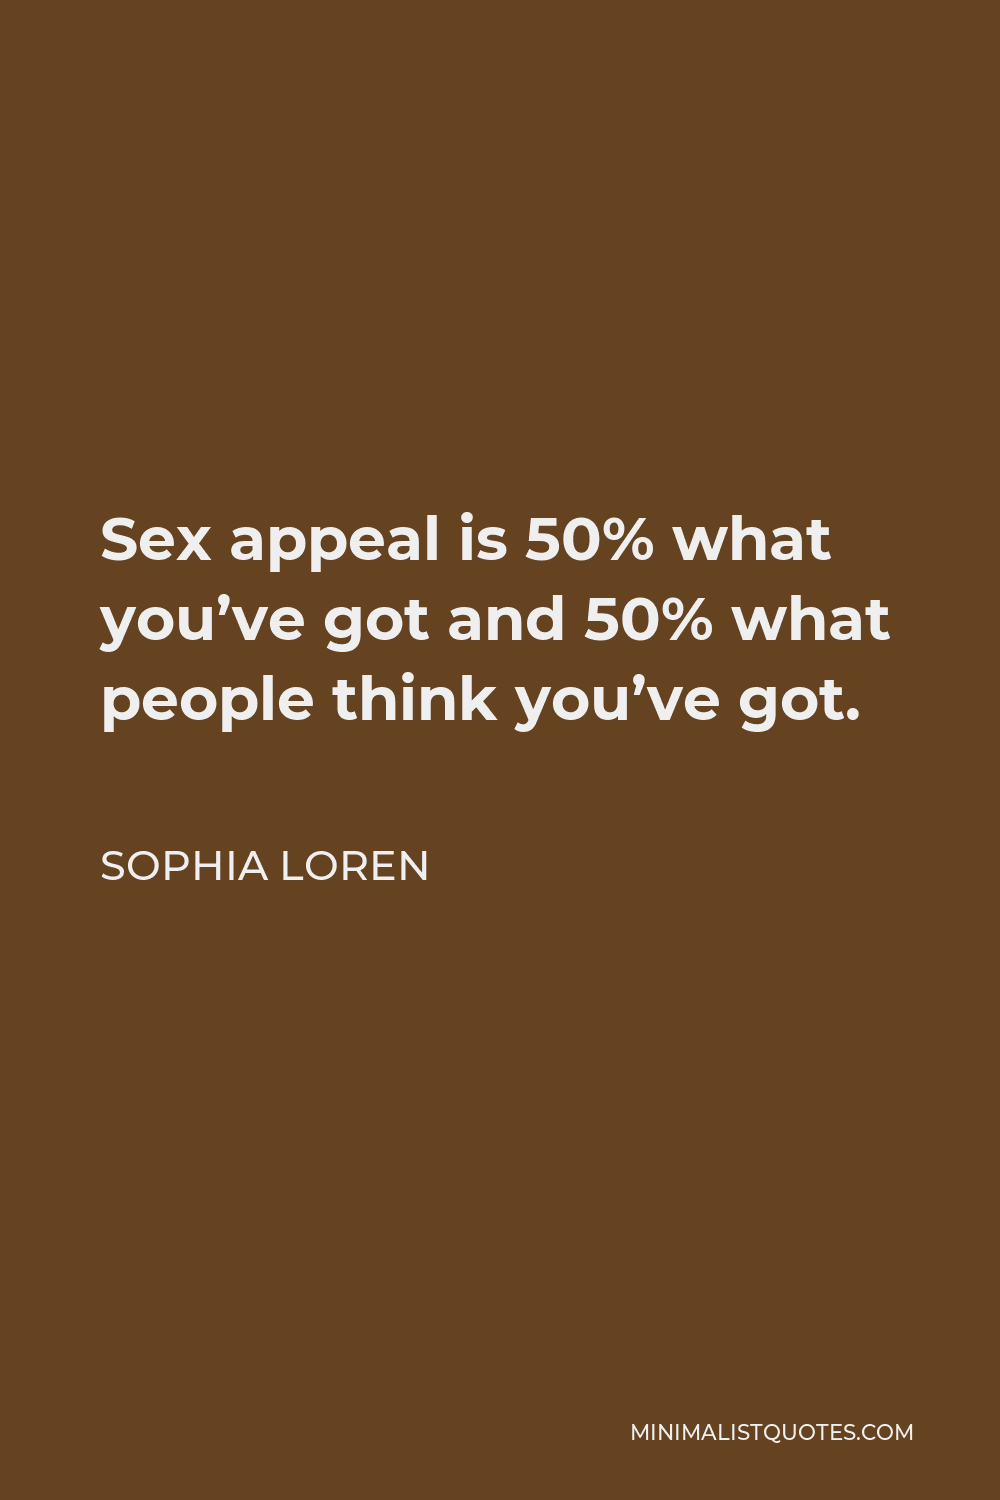 Sophia Loren Quote - Sex appeal is 50% what you’ve got and 50% what people think you’ve got.